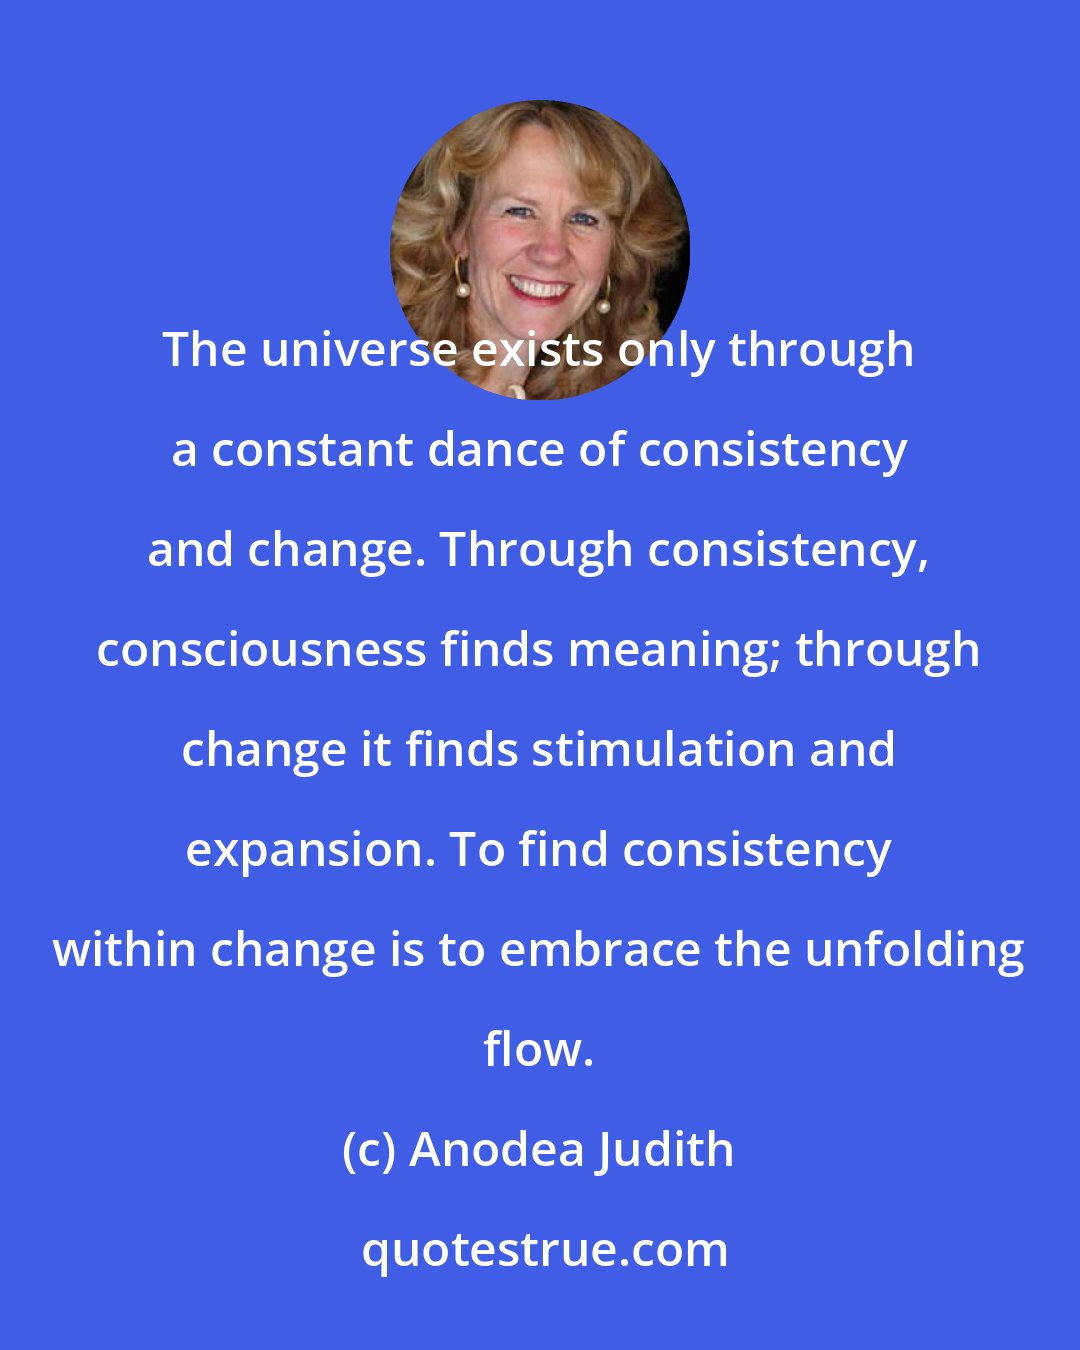 Anodea Judith: The universe exists only through a constant dance of consistency and change. Through consistency, consciousness finds meaning; through change it finds stimulation and expansion. To find consistency within change is to embrace the unfolding flow.